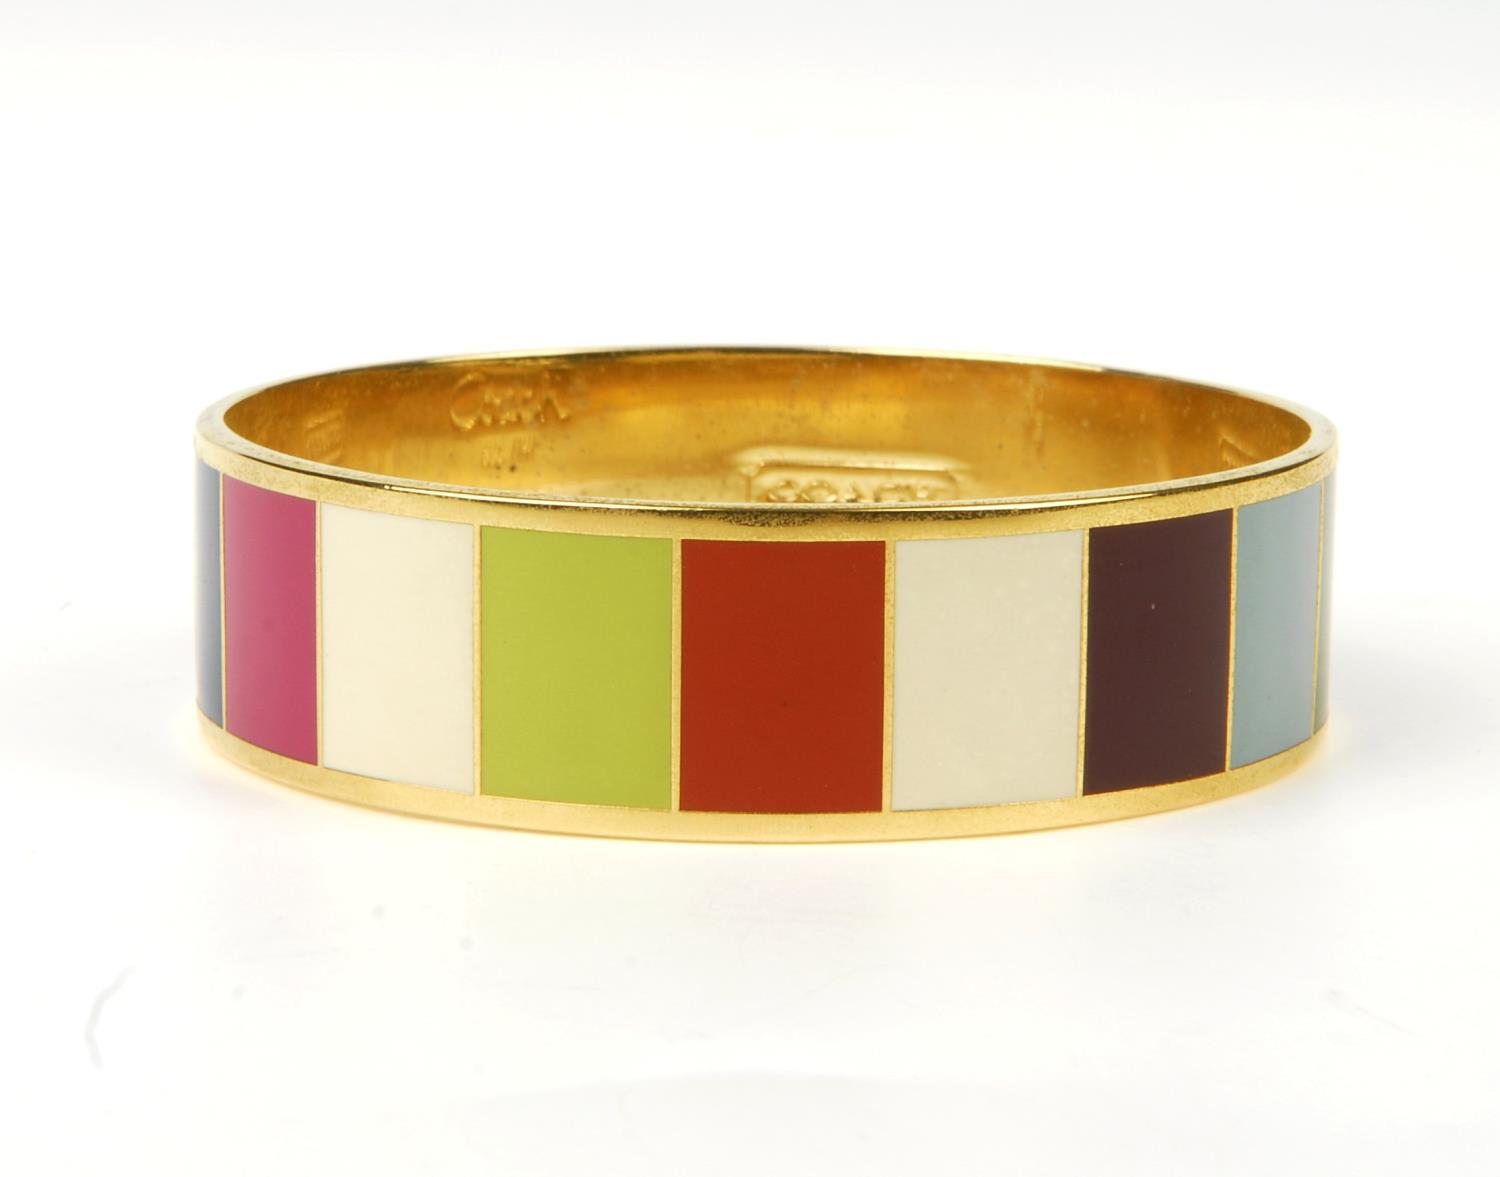 COACH - a Legacy striped bangle. The gold-tone bangle featuring multicoloured striped enamel inlay - Image 7 of 9